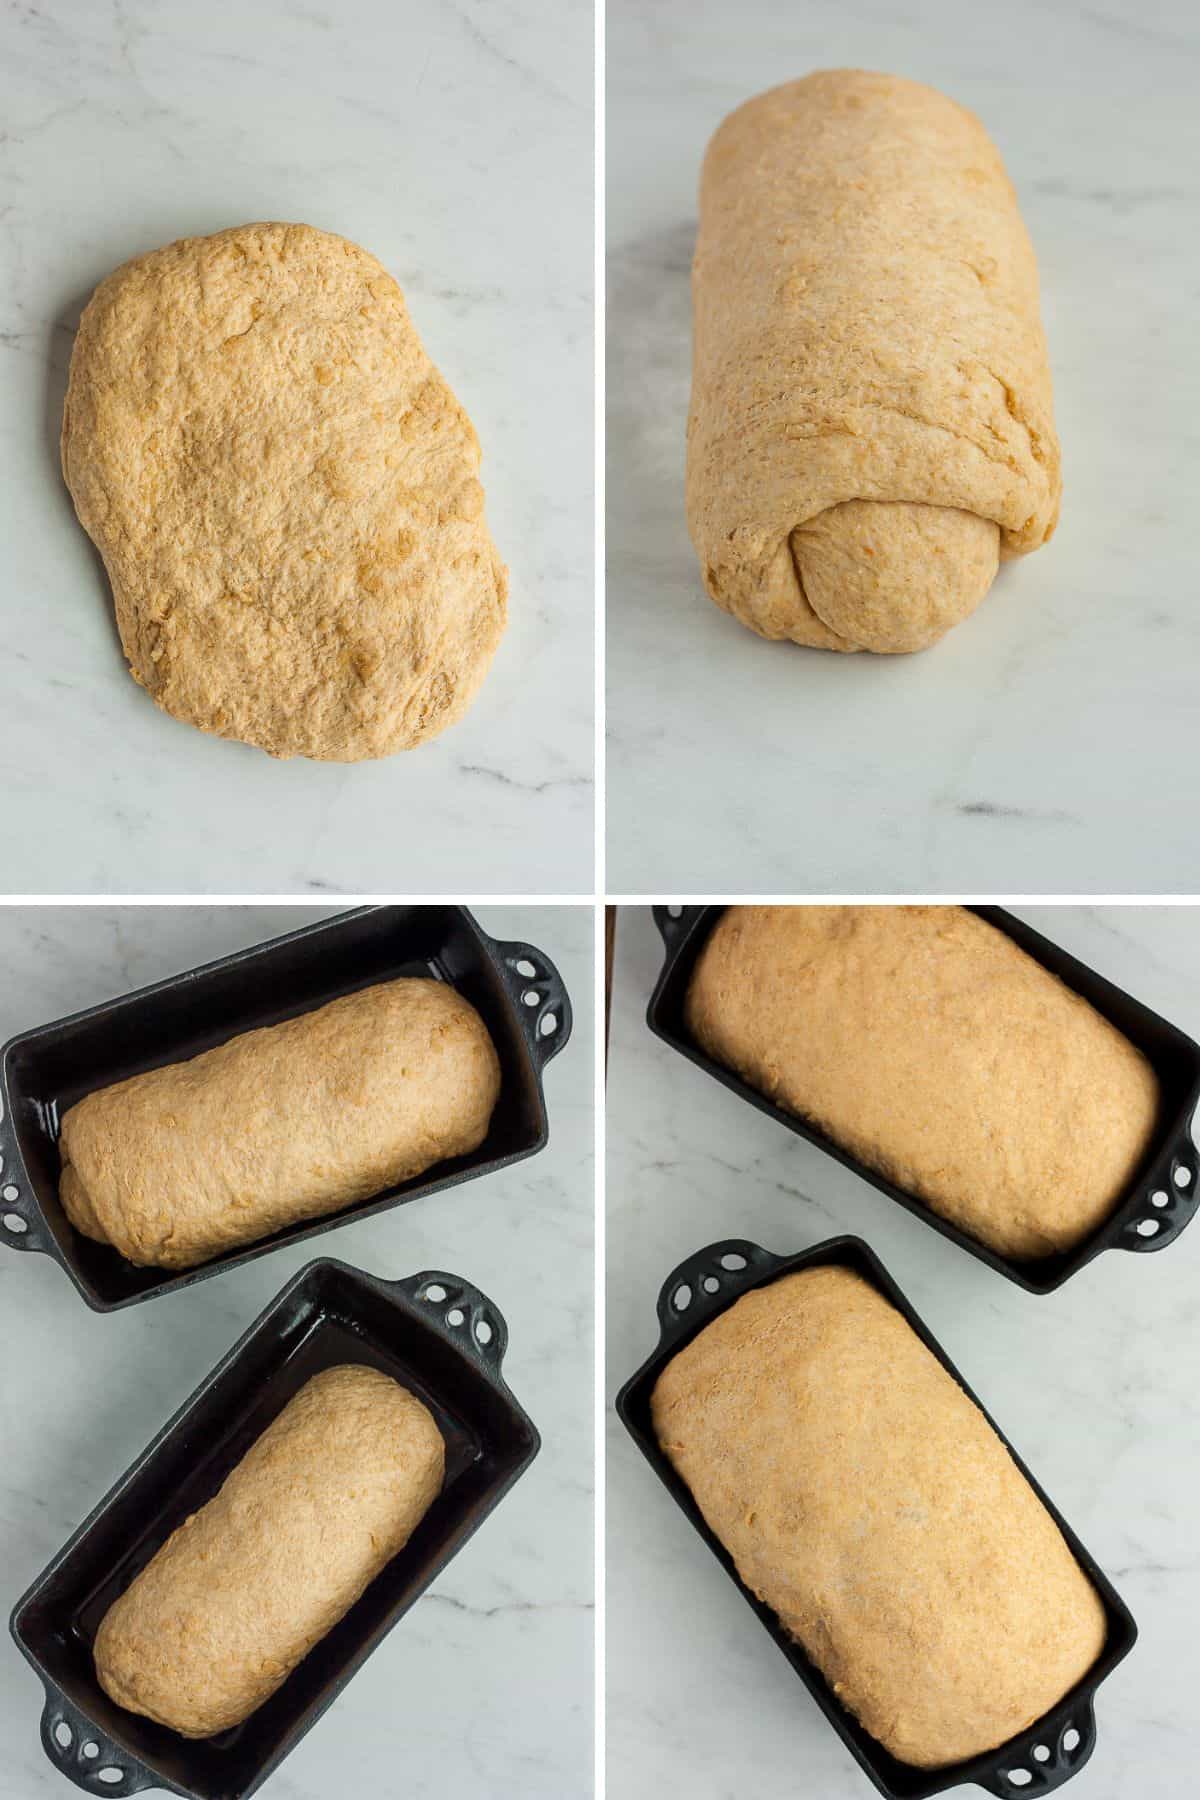 4 photos showing how to roll and bake whole wheat bread dough.